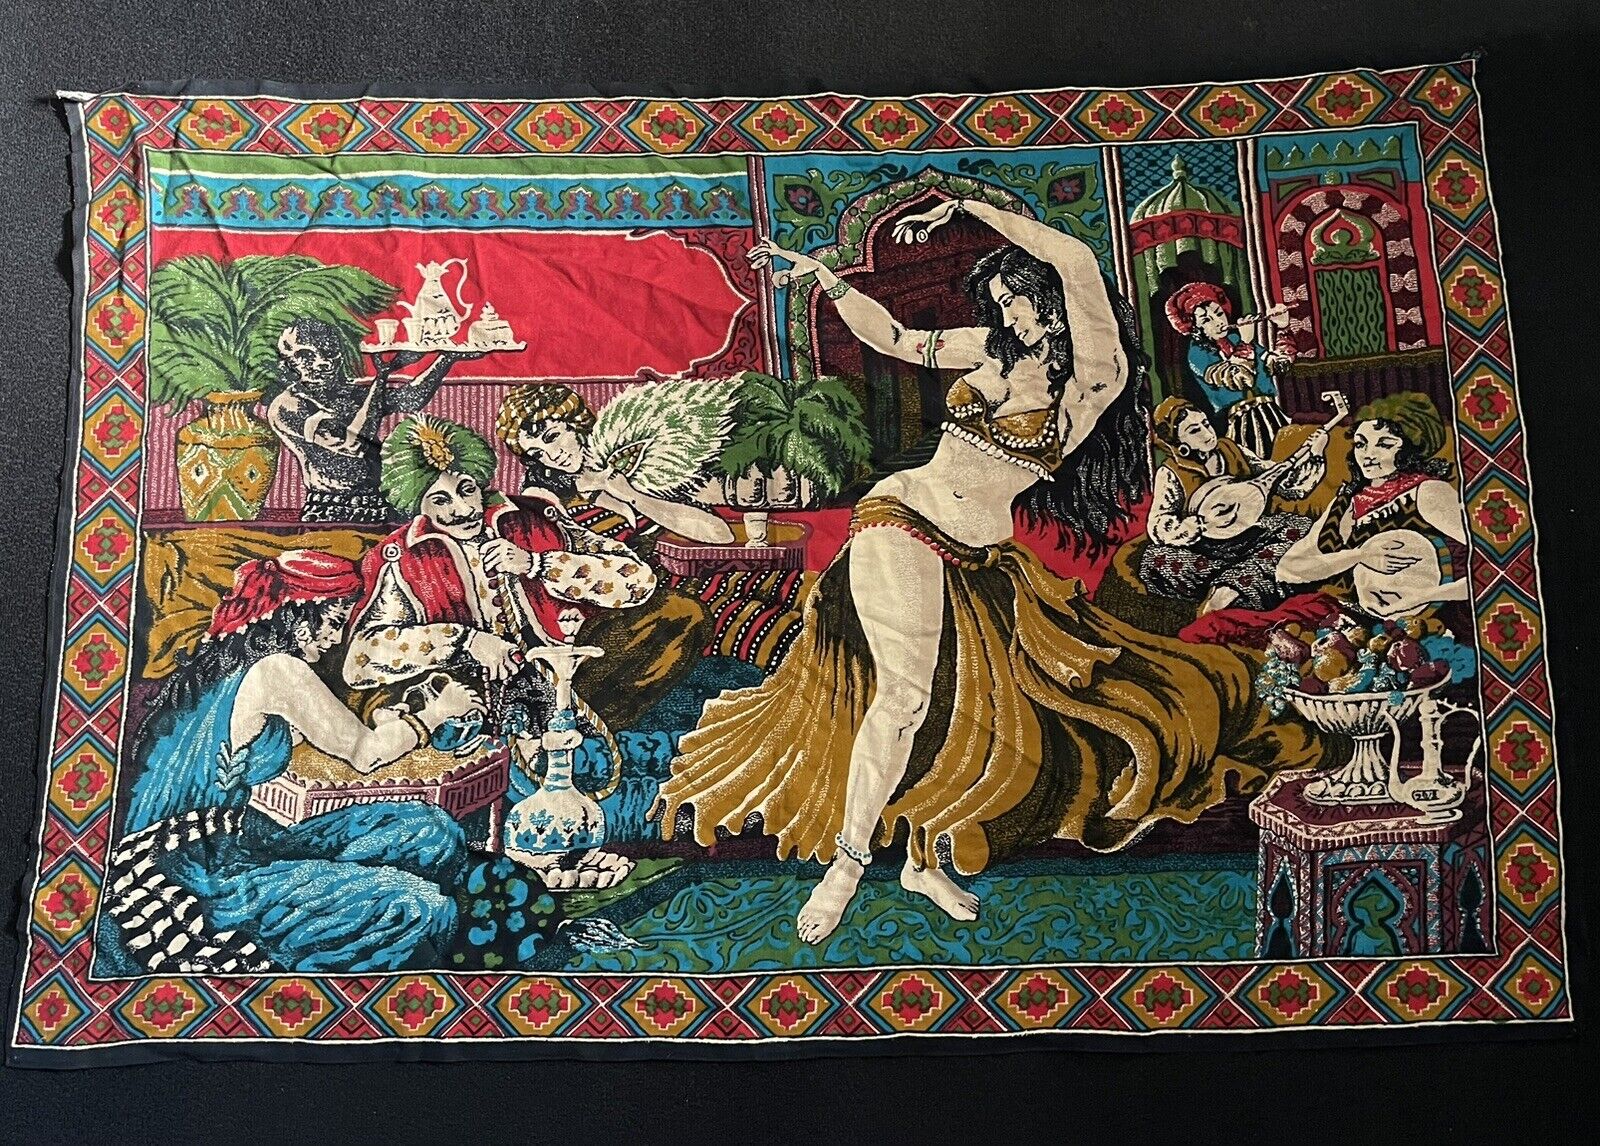 1960s VINTAGE Middle Eastern Tapestry - 58” x 39” - Belly Dancers & Musicians